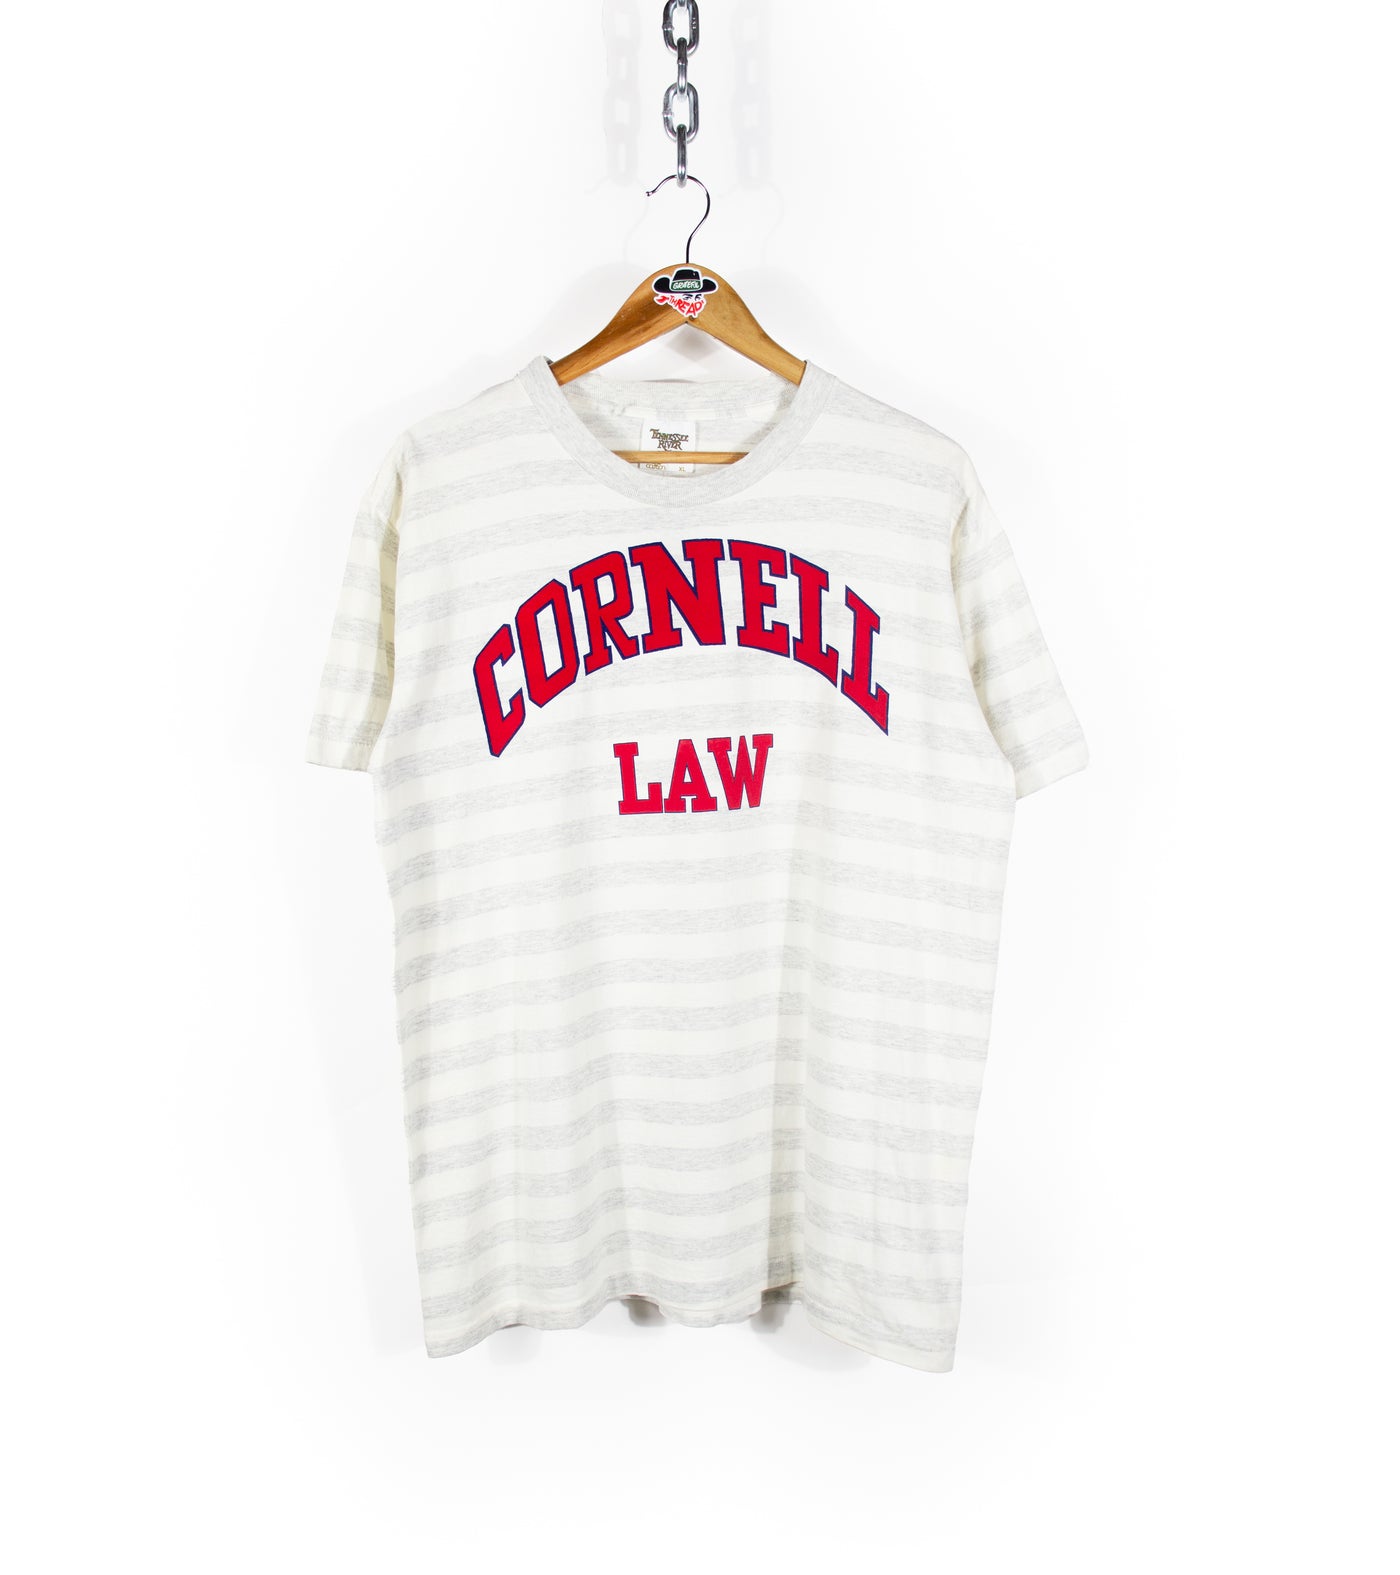 Vintage 90s Cornell Law Striped T-Shirt